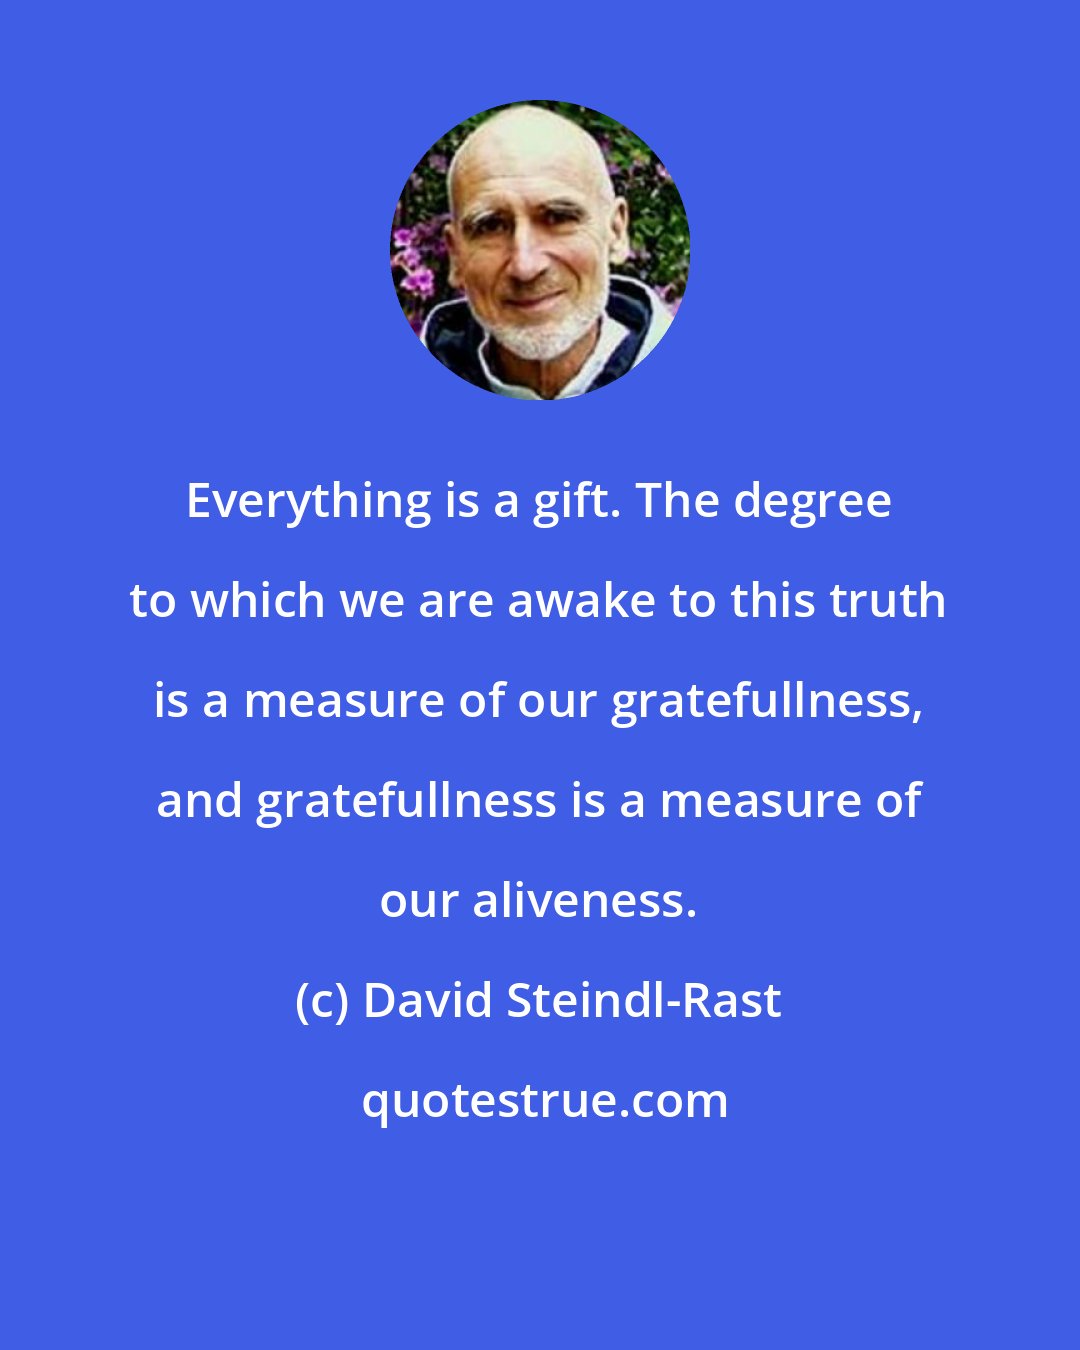 David Steindl-Rast: Everything is a gift. The degree to which we are awake to this truth is a measure of our gratefullness, and gratefullness is a measure of our aliveness.